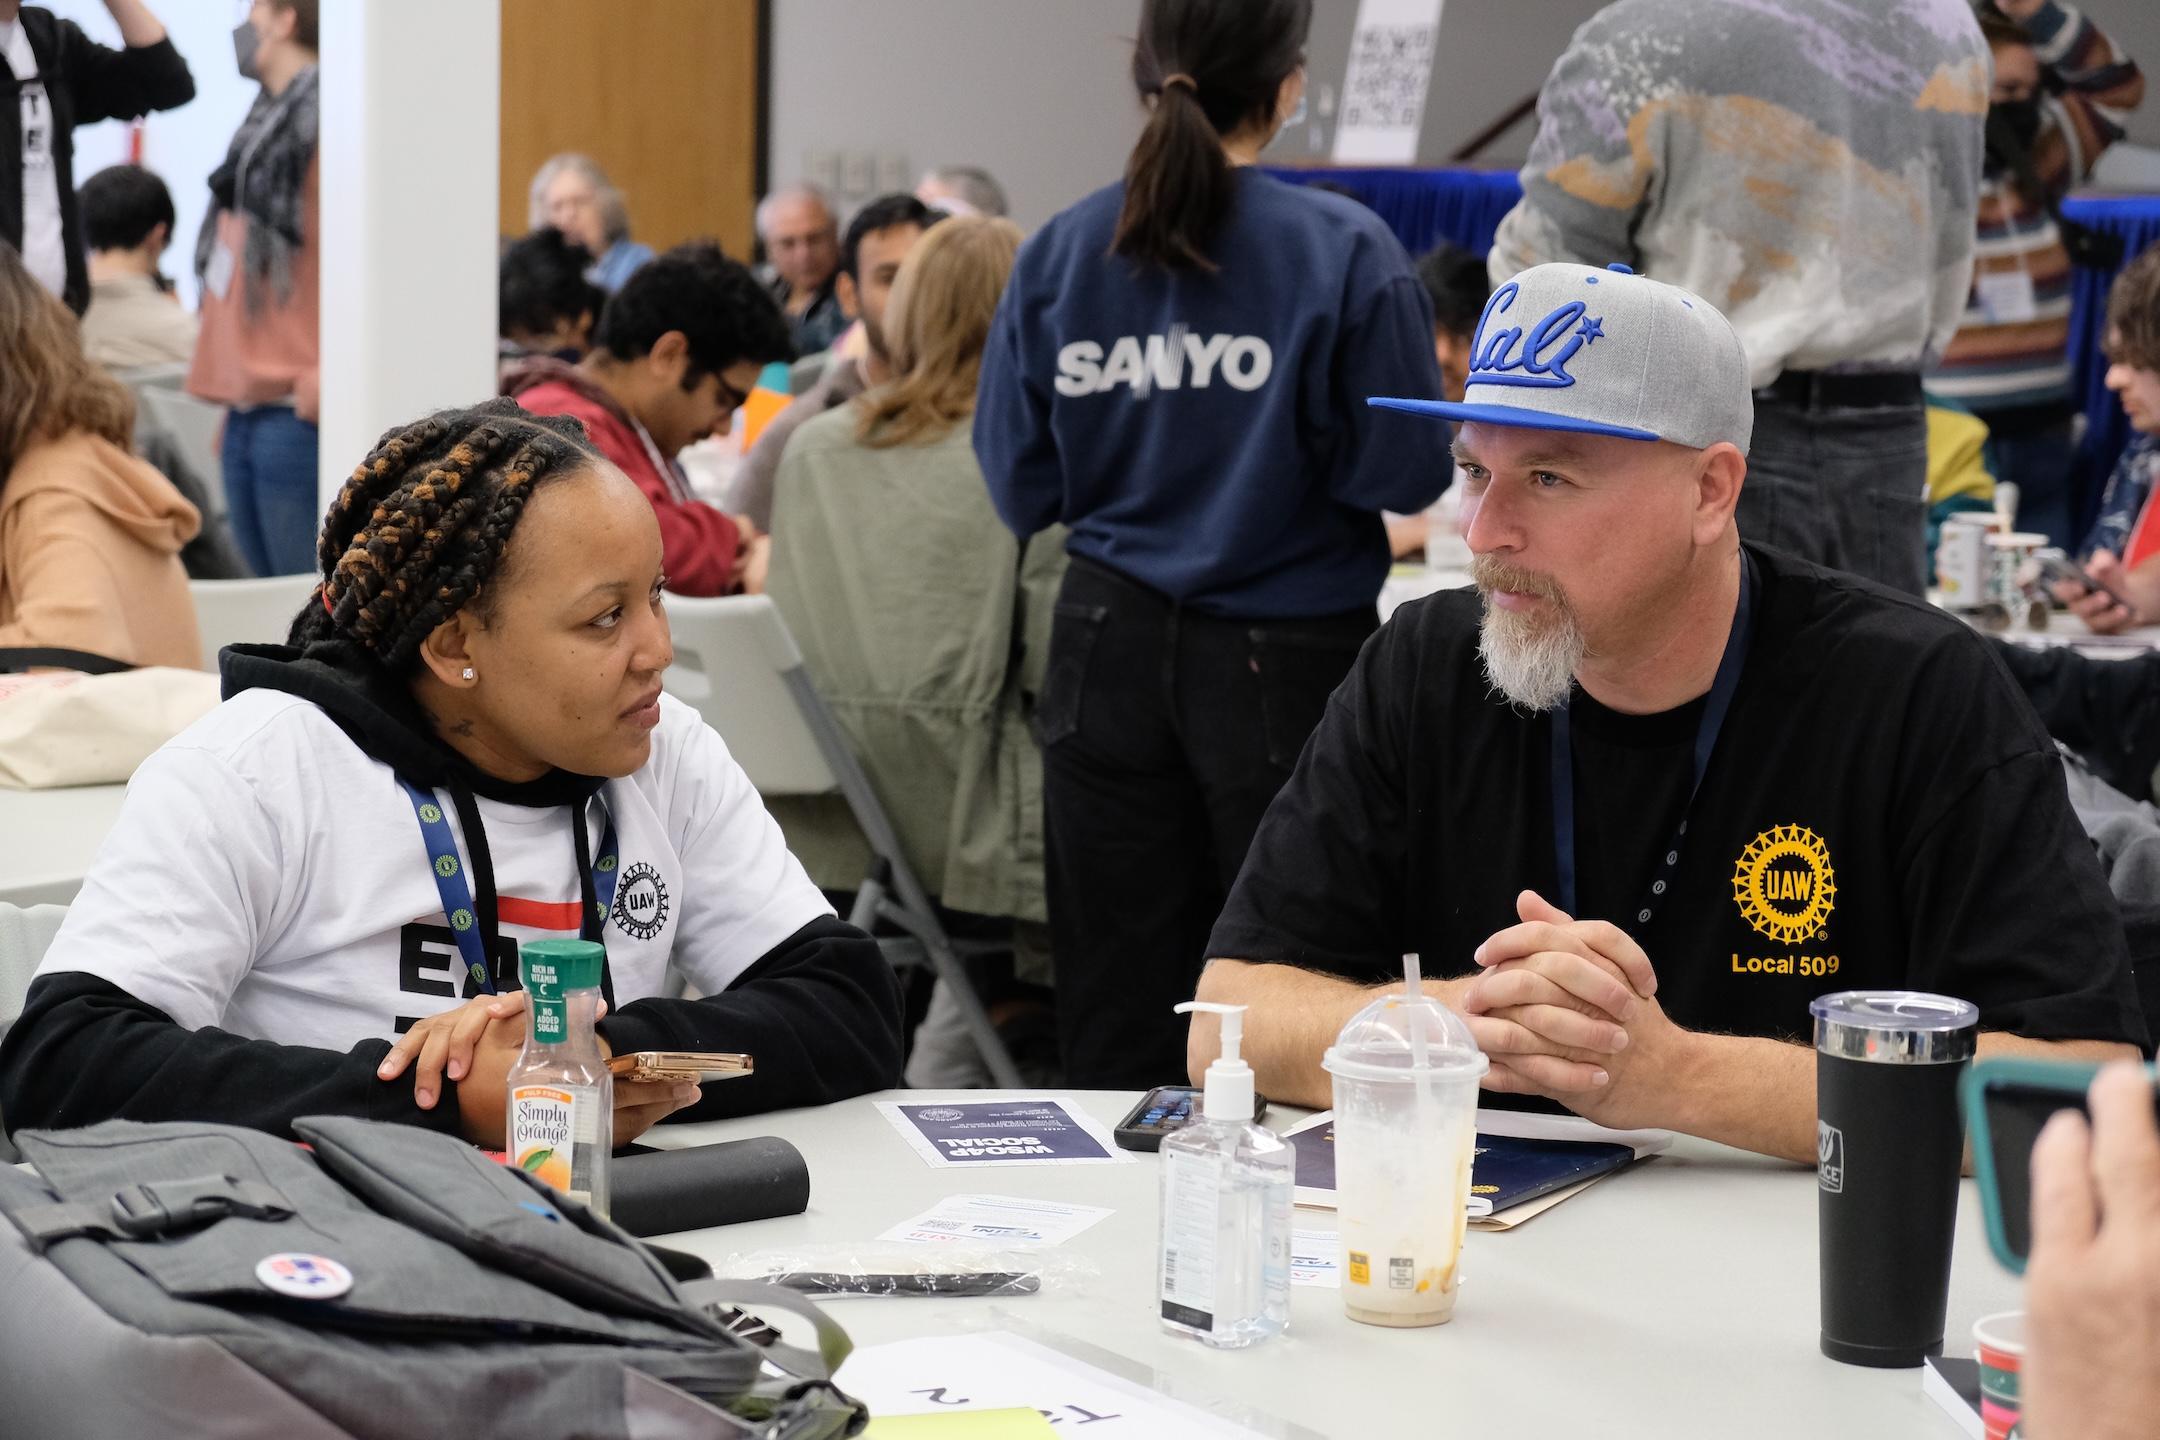 Two UAW 509 members talking at a table, with many others talking at tables in the background